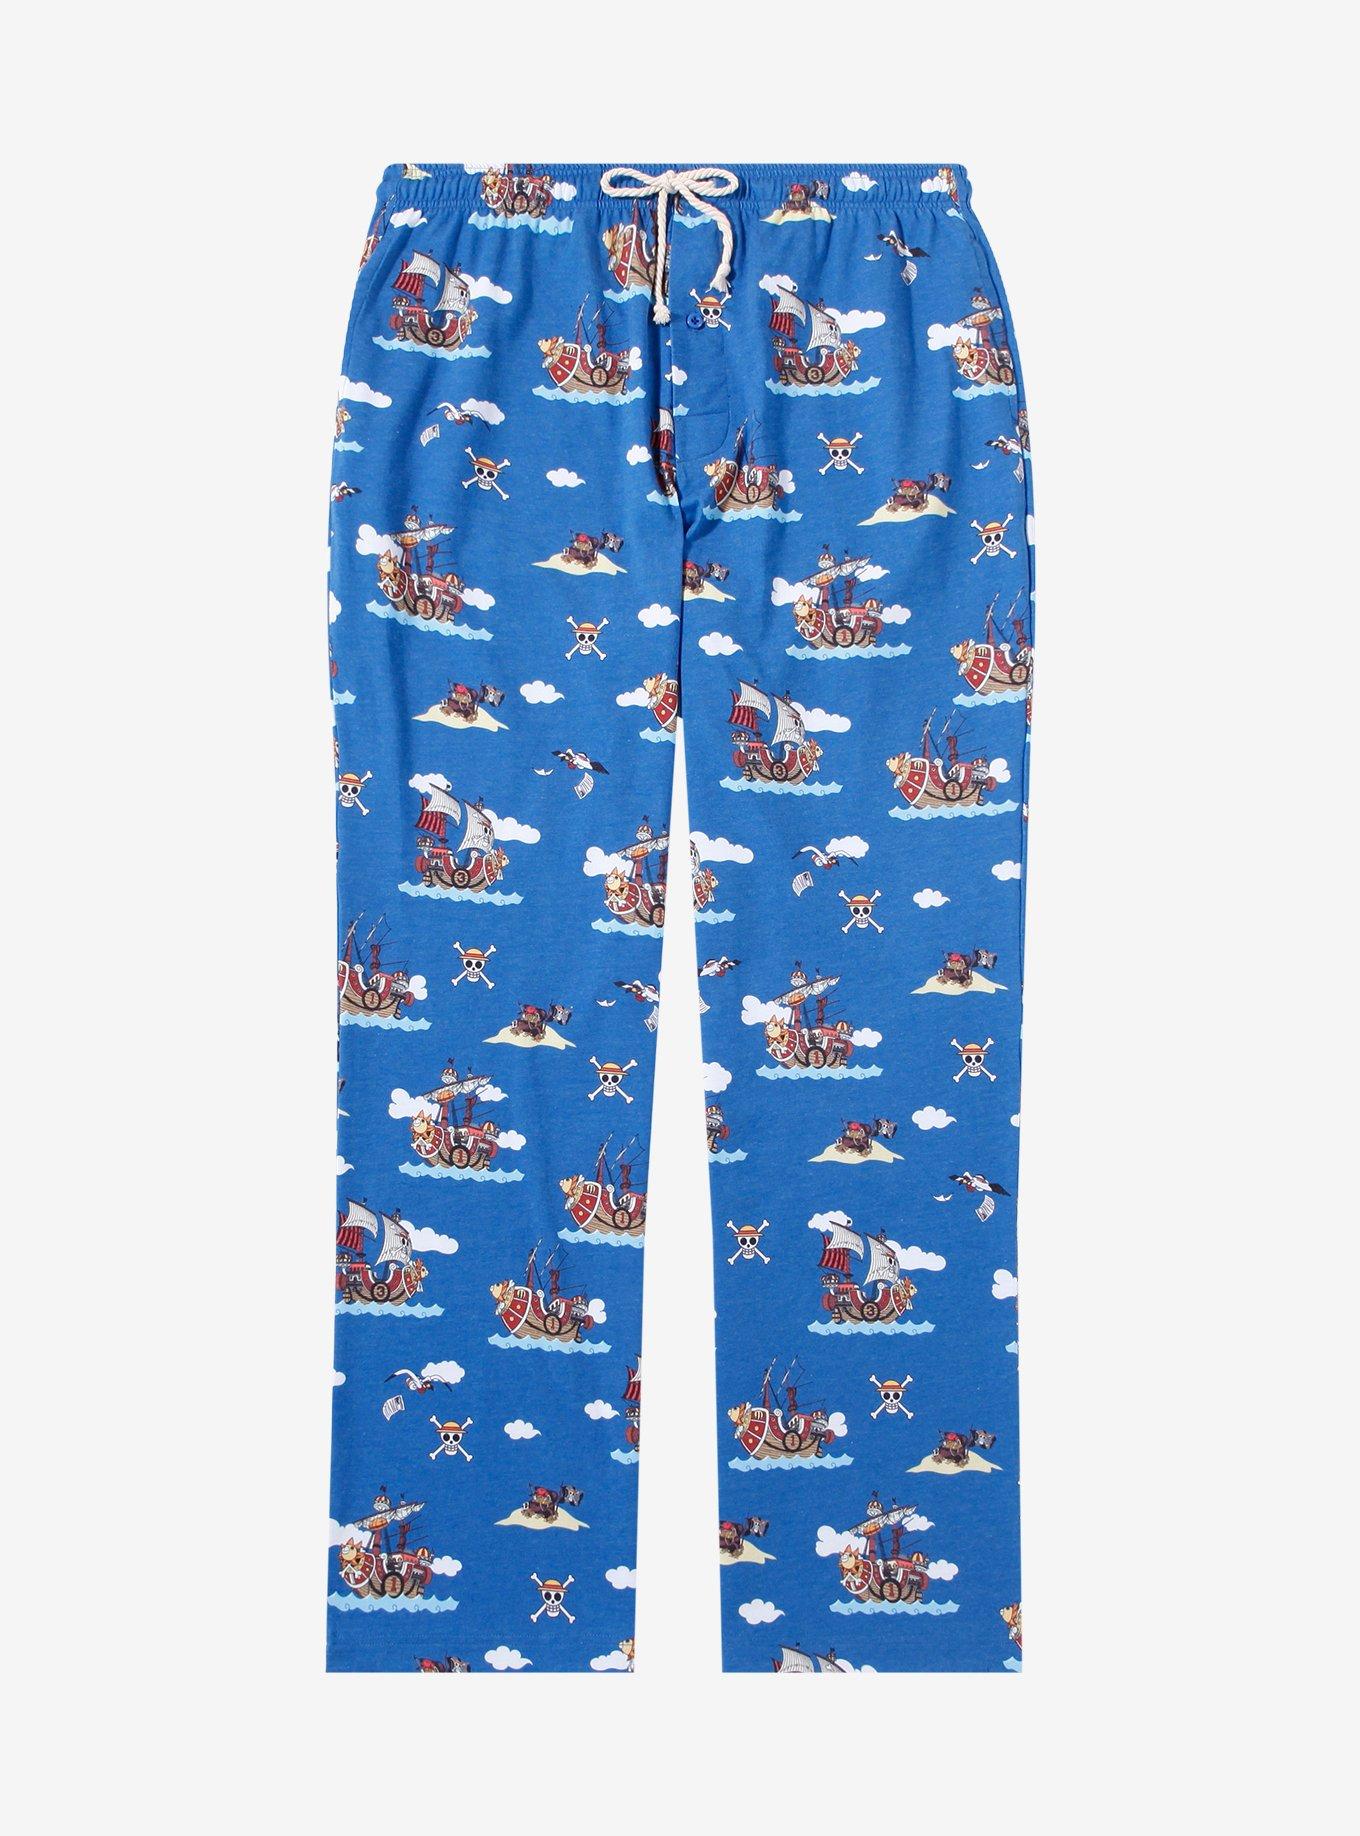 One Piece Scenic Ship Allover Print Sleep Pants — BoxLunch Exclusive